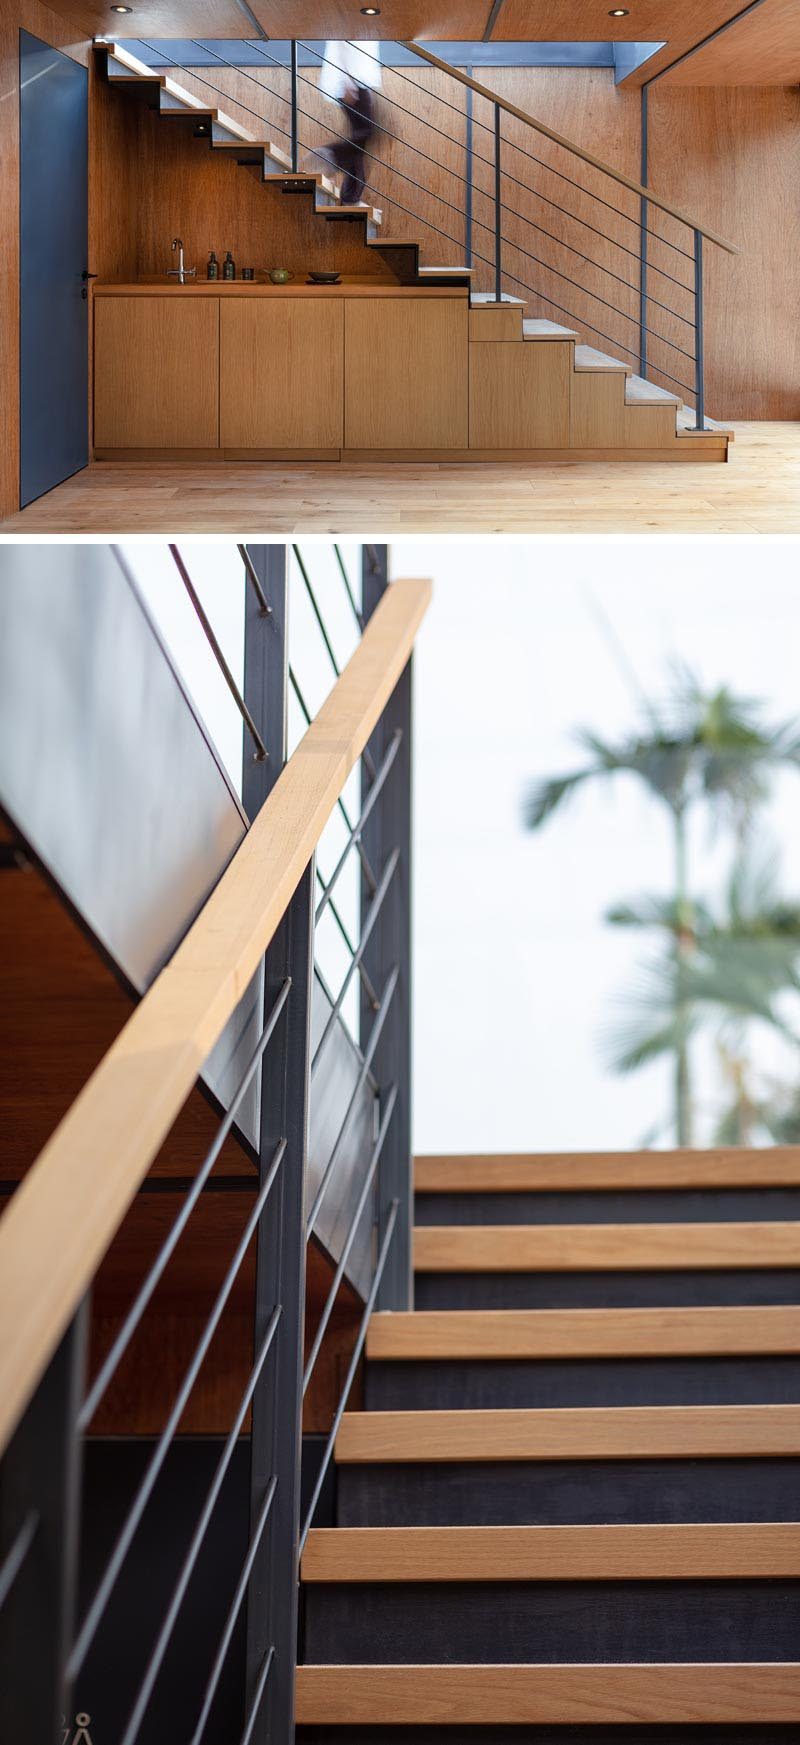 Industrial touches like this steel and wood stairs with a matching handrail, connect two levels of a modern marketing suite made from multiple shipping containers. #Stairs #SteelStairs #StairDesign #ModernStairs